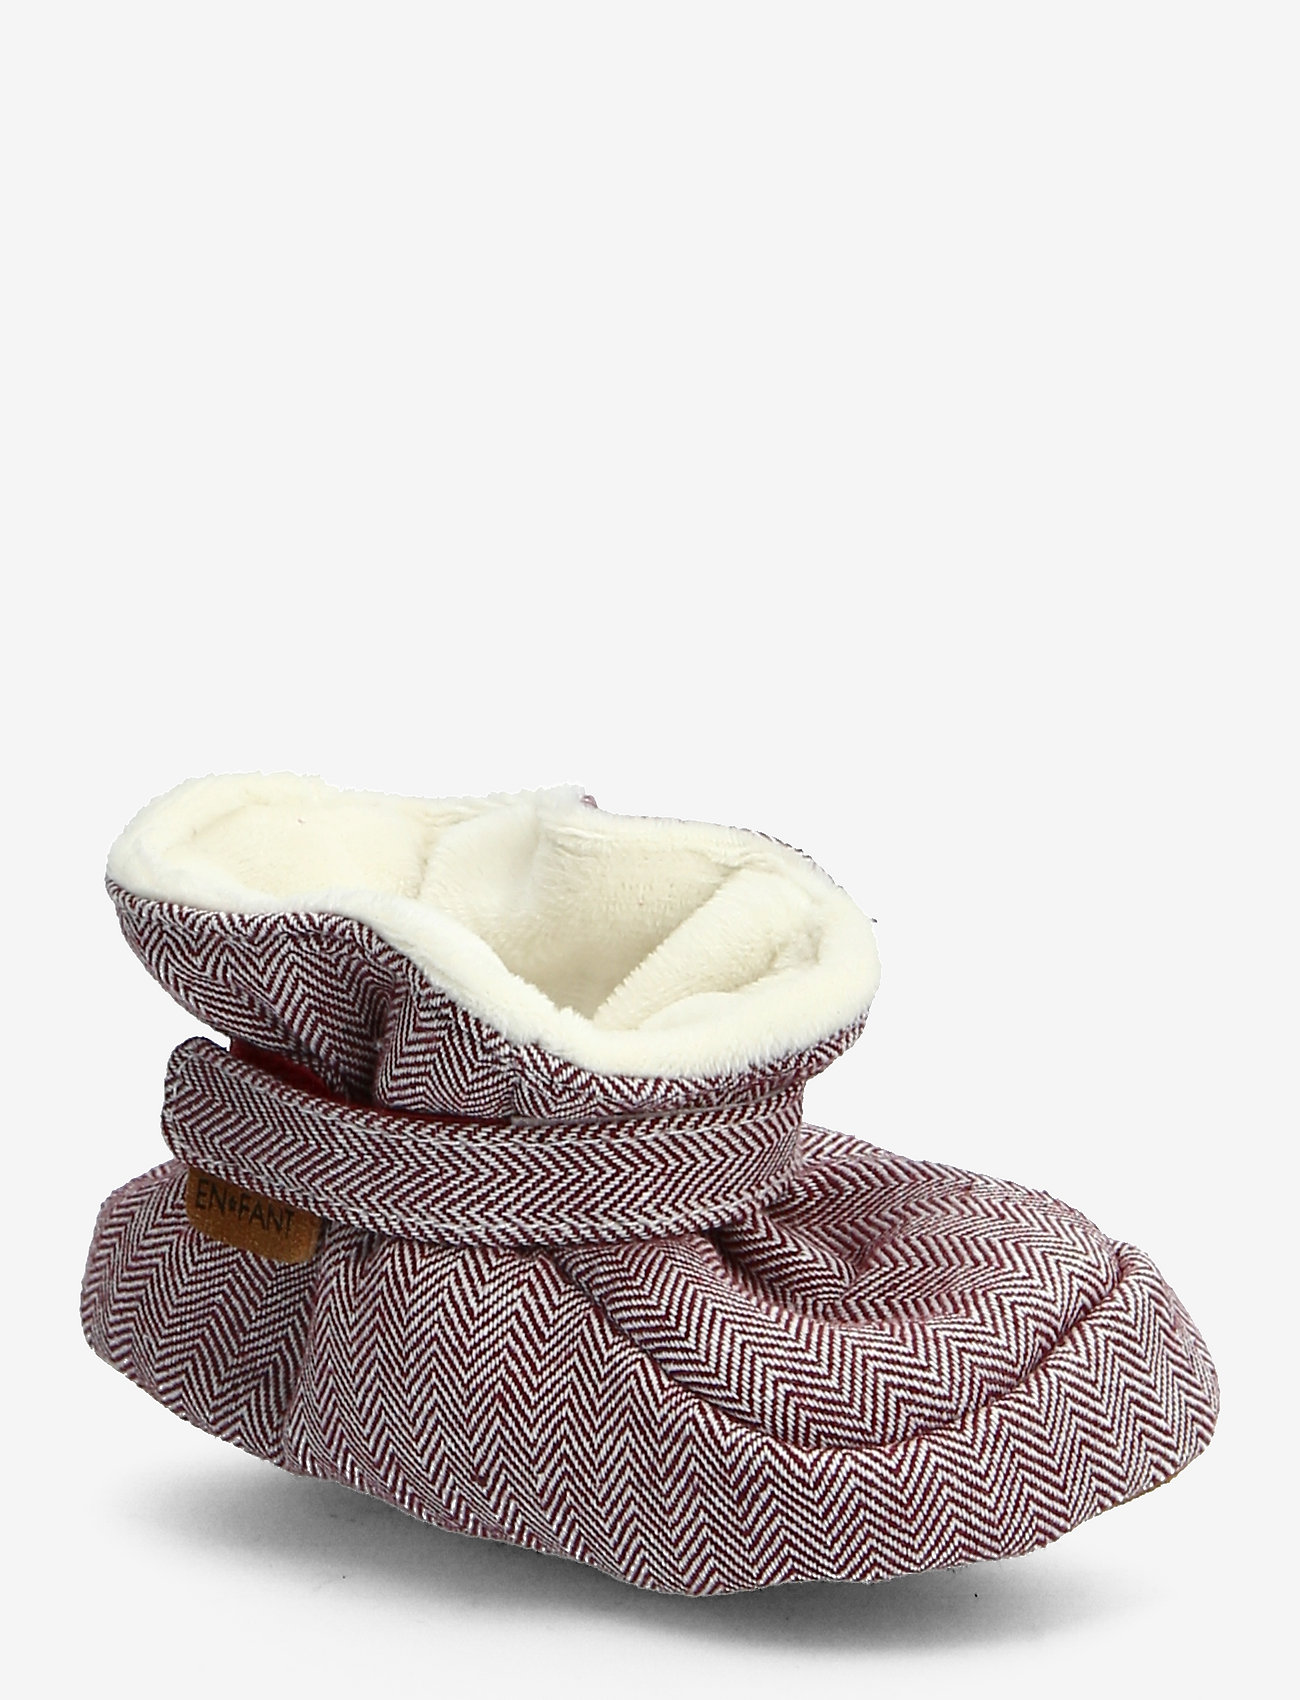 En Fant - Baby Slippers - lowest prices - ruby wine - 0